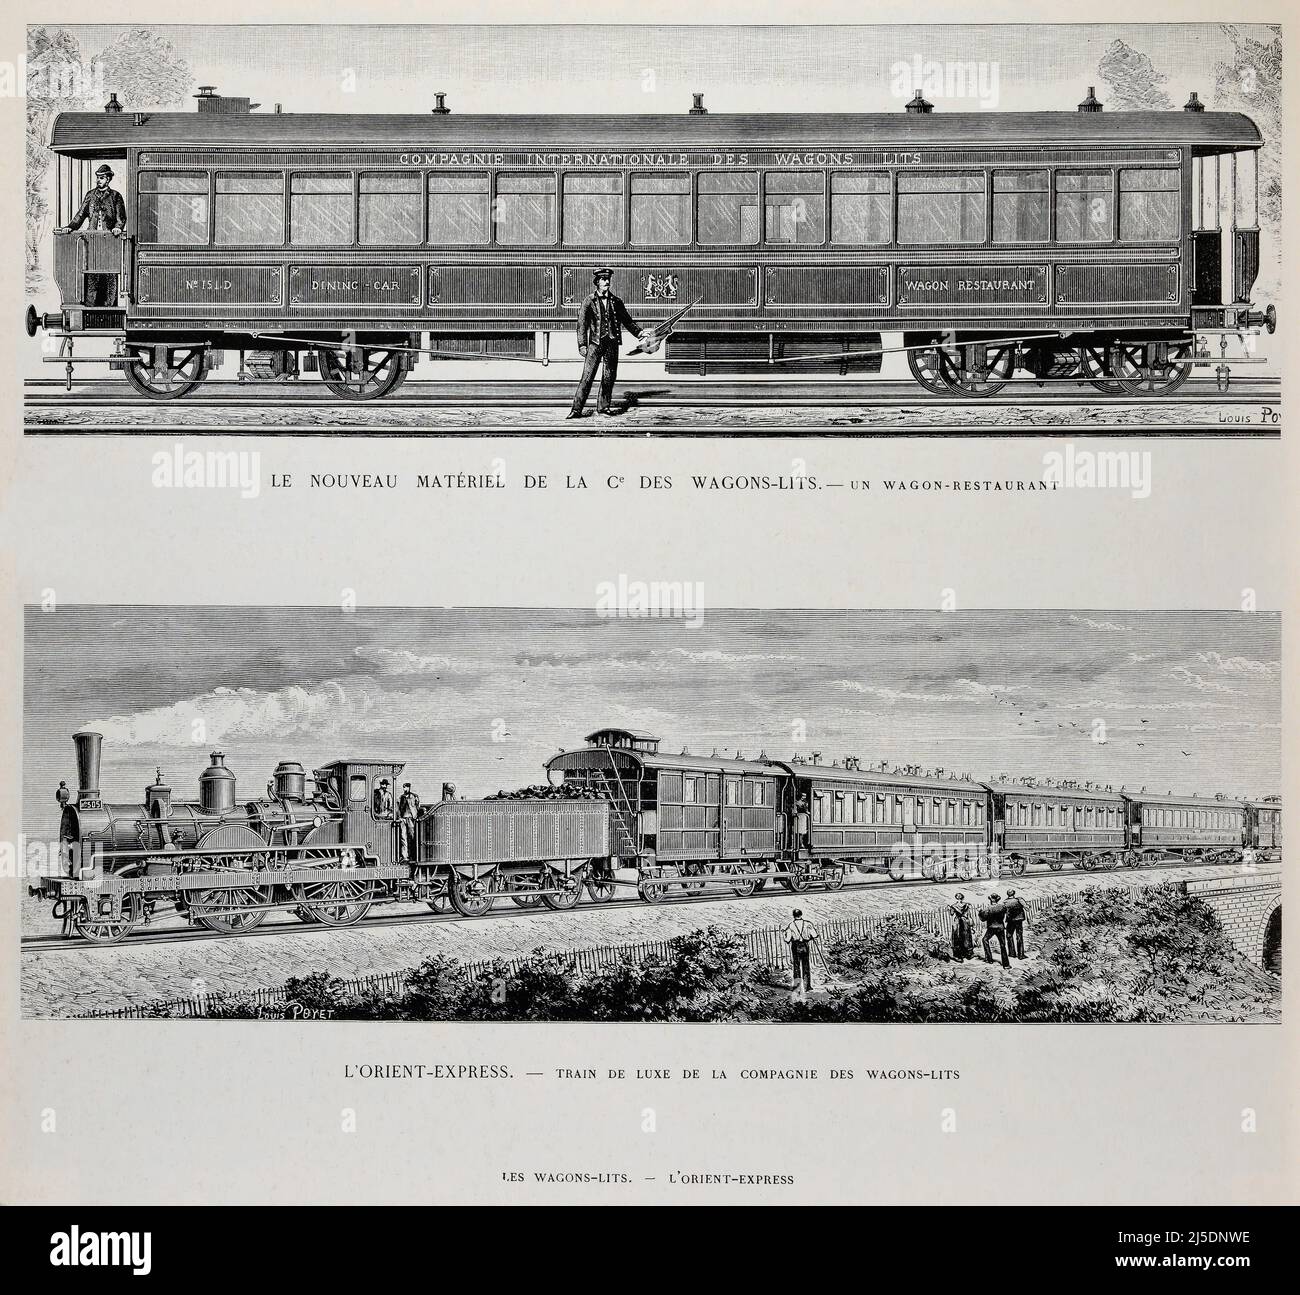 Engraving depicting the exterior of a sleeping car on the Orient